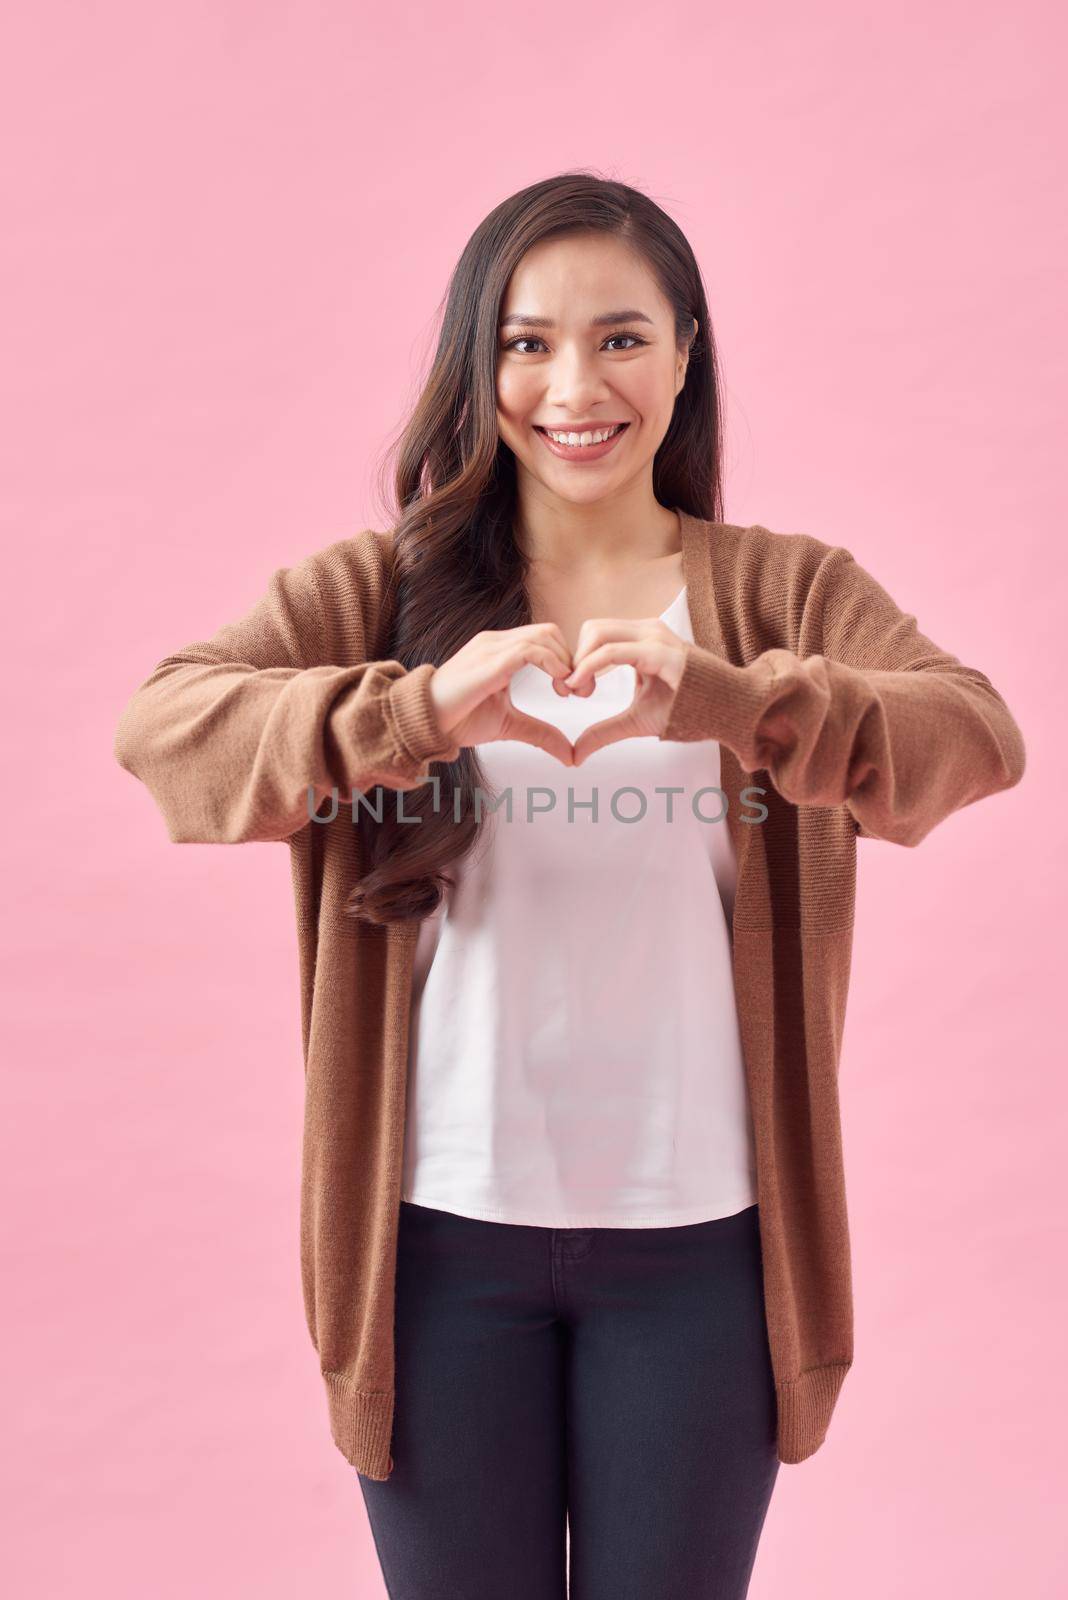 Asian woman making a heart shape with her hands, isolated over pink background